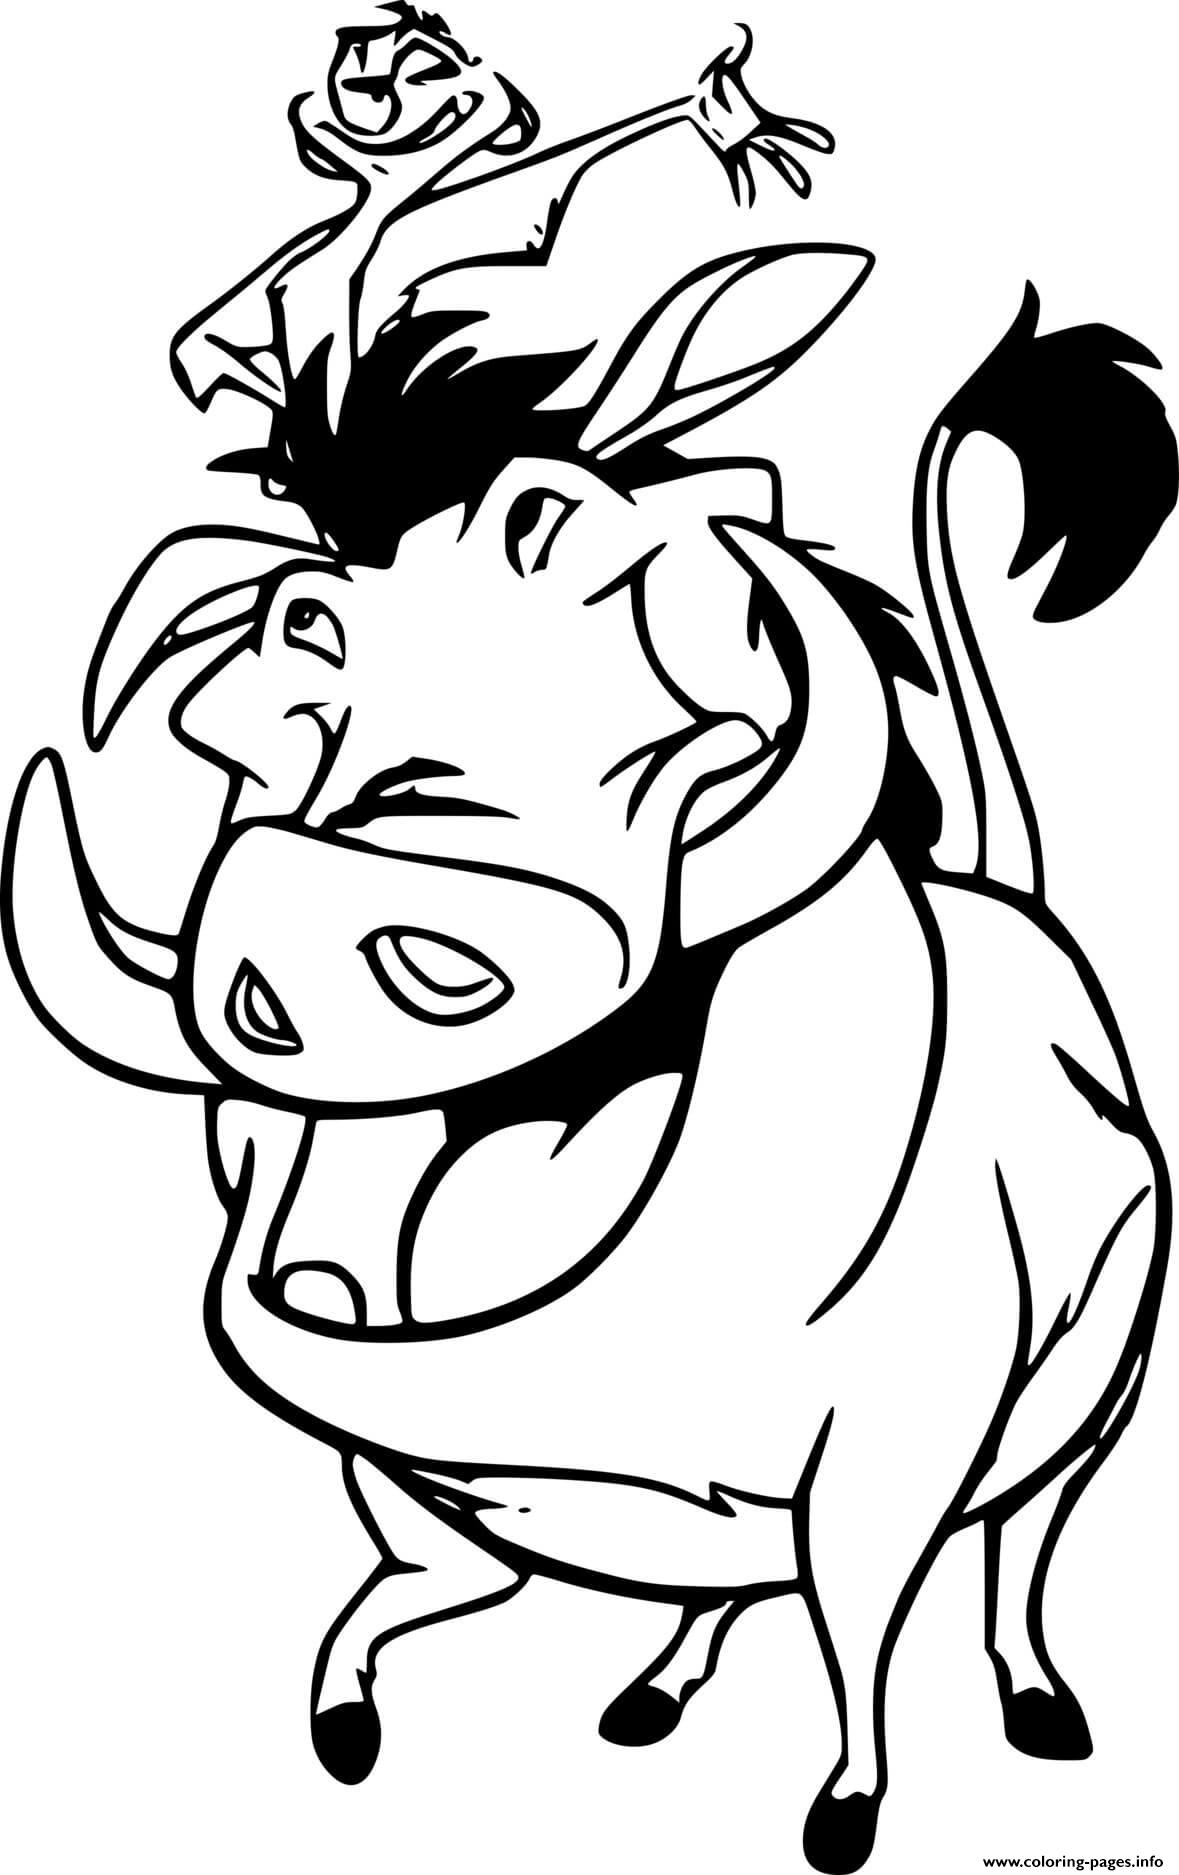 Timon And Pumbaa coloring